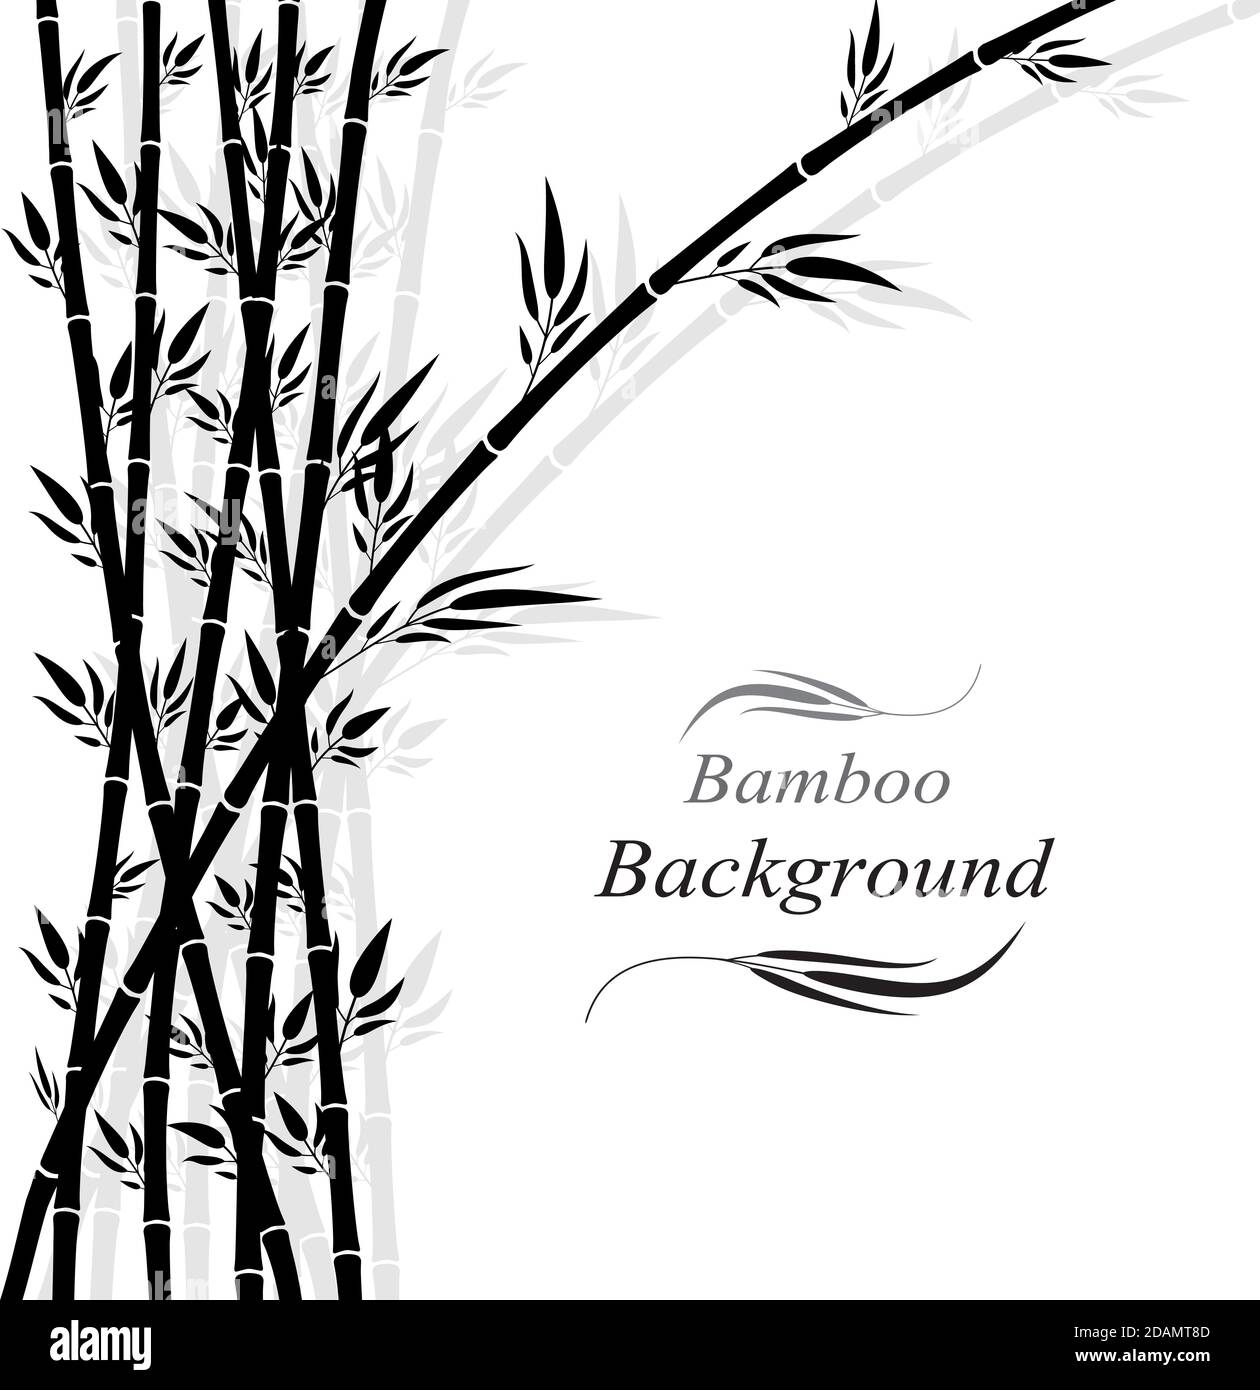 Bamboo forest.Chinese or japanese bamboo grass silhouette background art design.Vector illustration.Eps10 Stock Vector